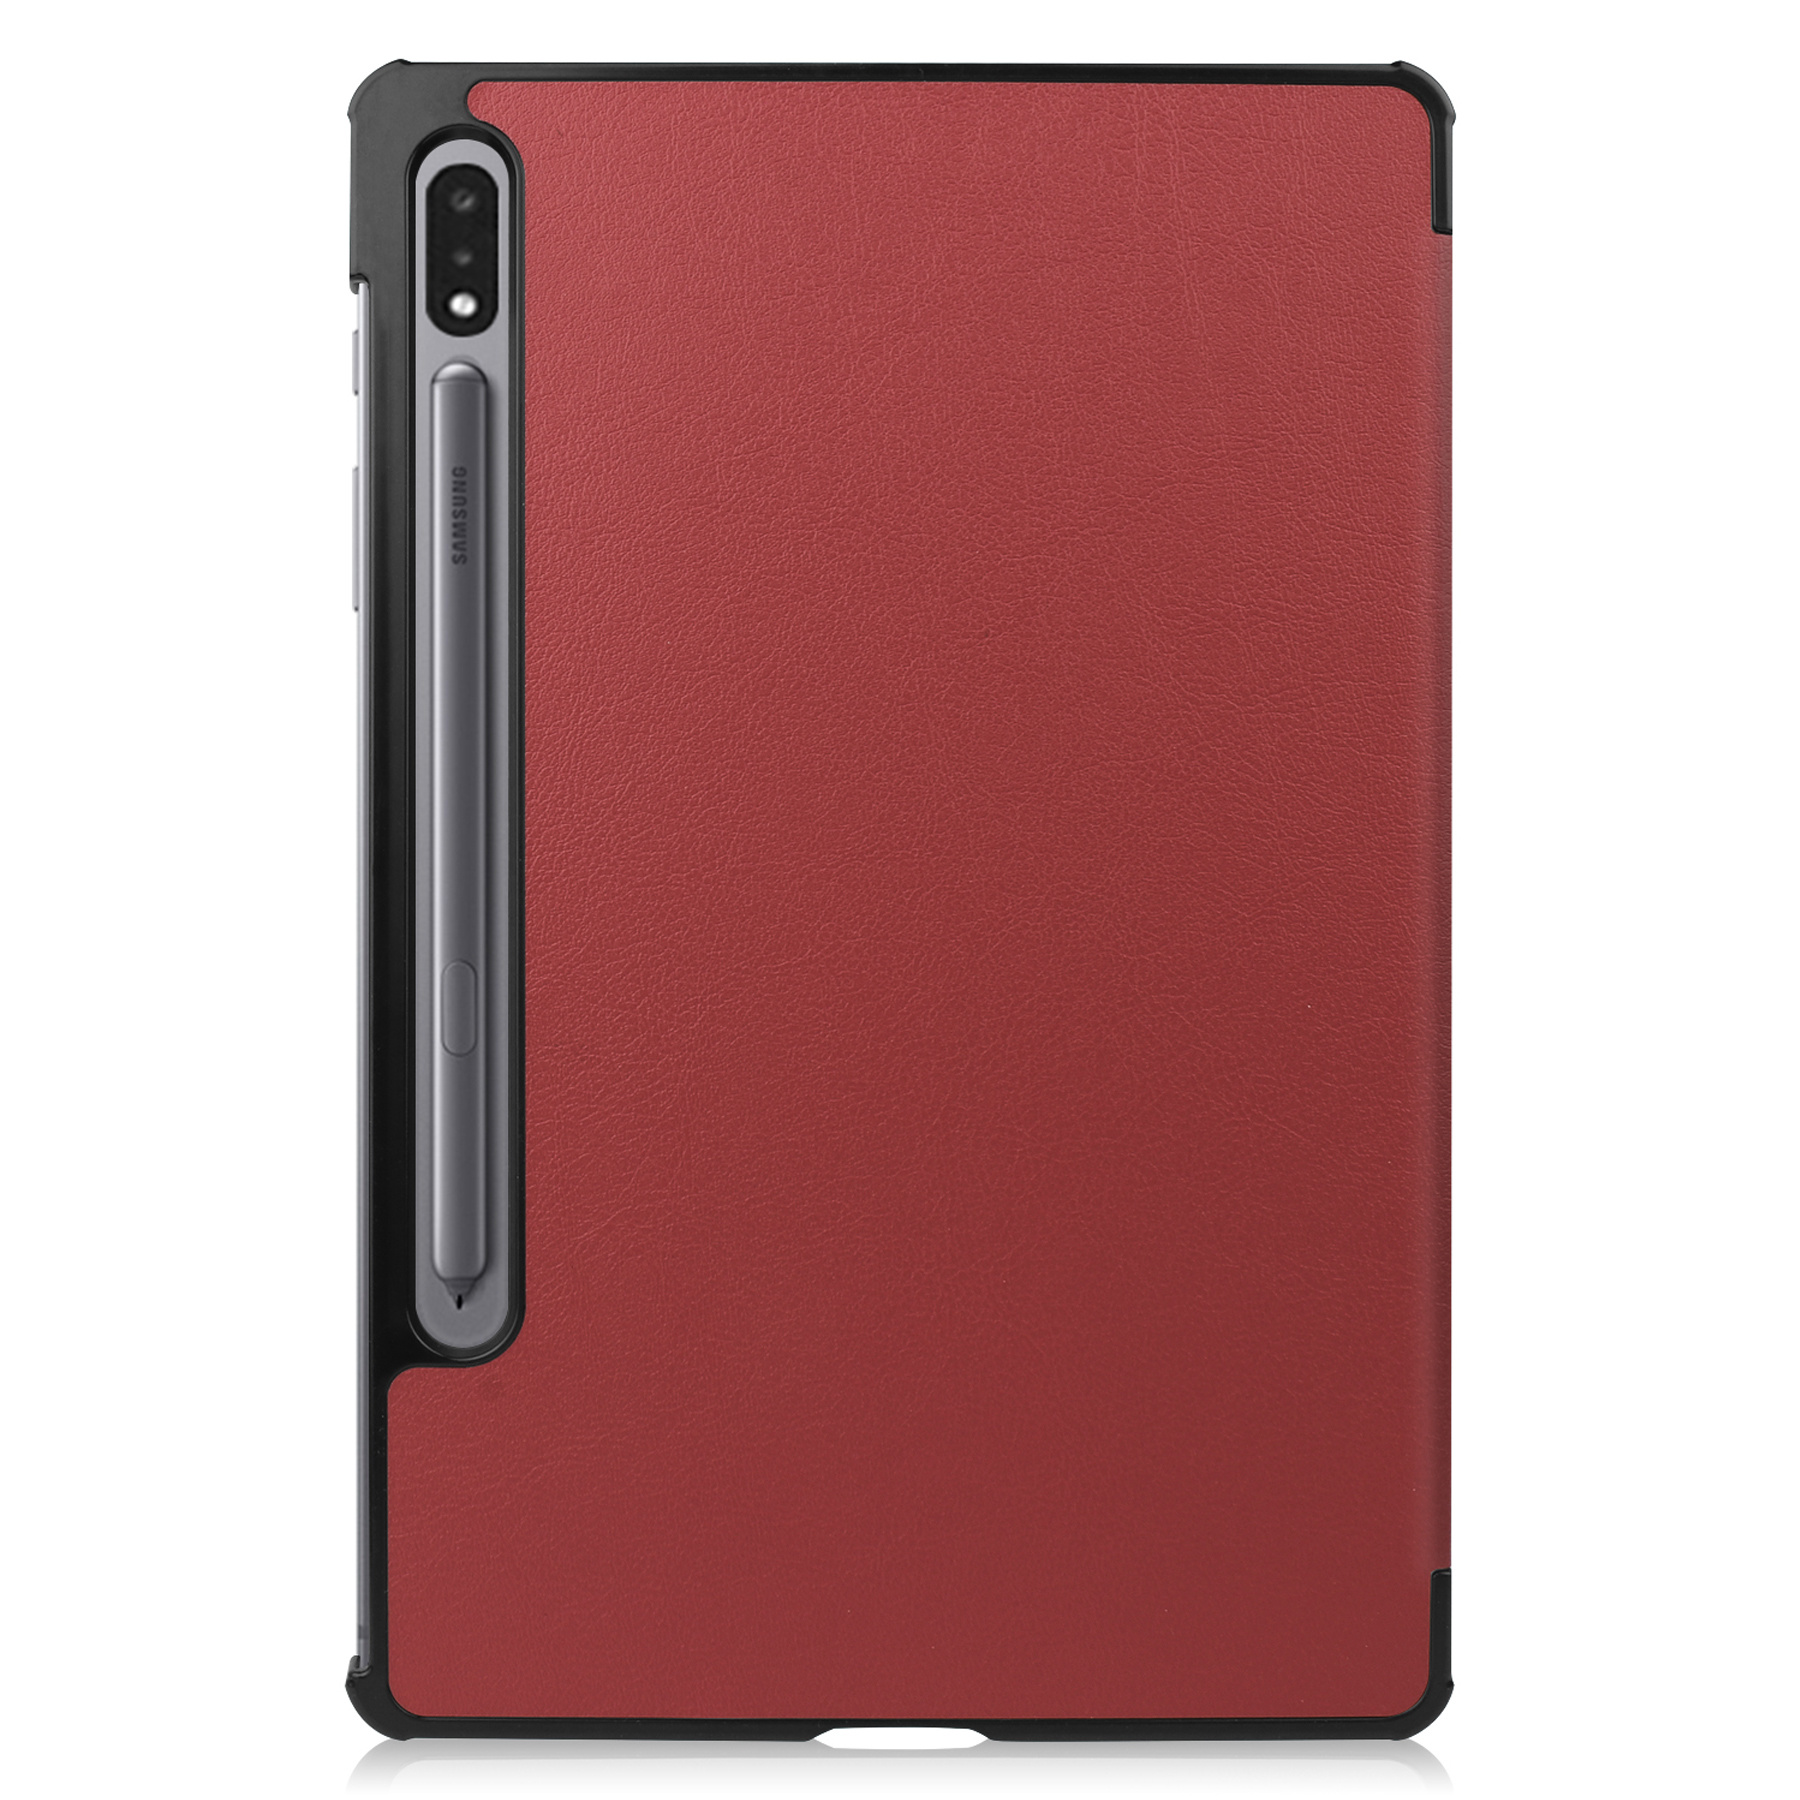 Nomfy Samsung Galaxy Tab S8 Plus Hoesje 12,4 inch Case Donker Rood - Samsung Galaxy Tab S8 Plus Hoes Hardcover Hoesje Bookcase Met Uitsparing S Pen - Donker Rood